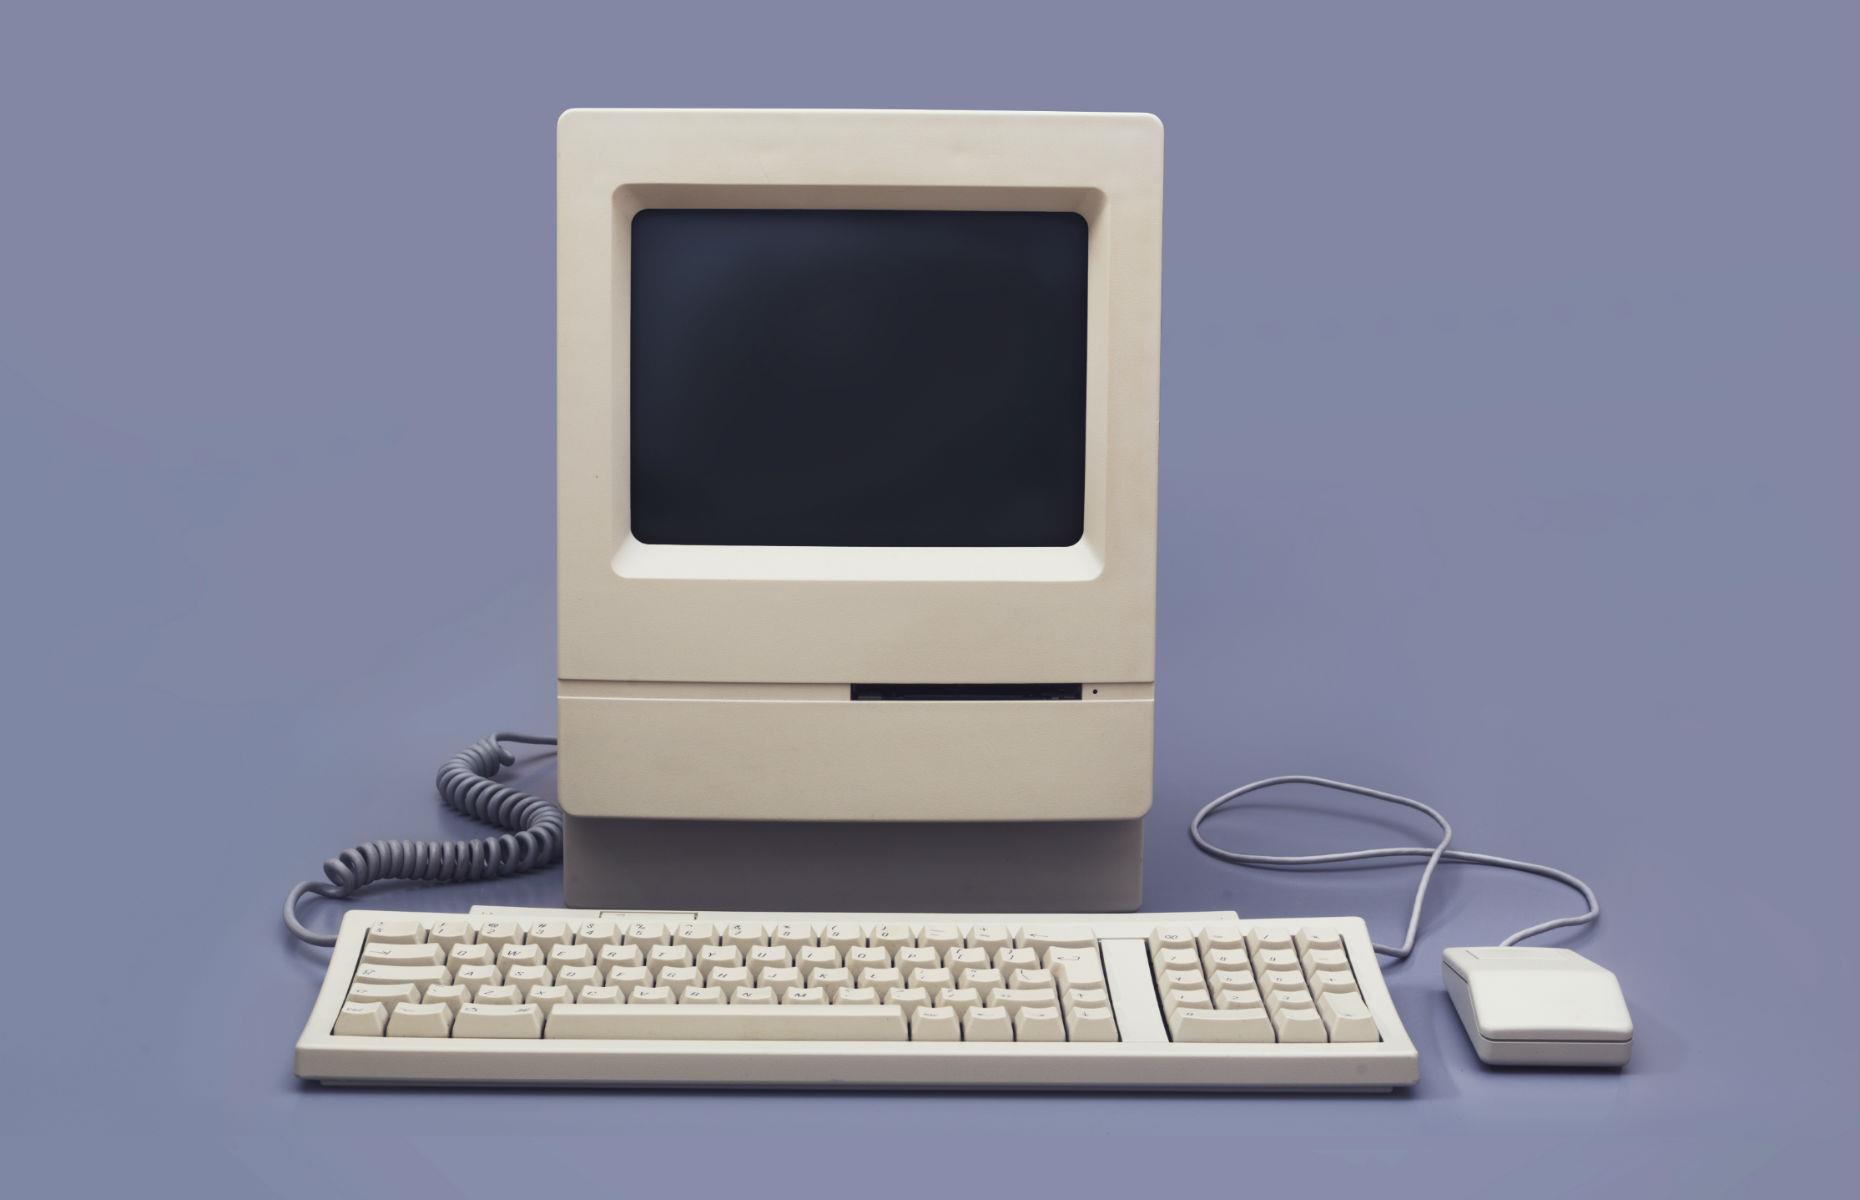 1984: personal computer